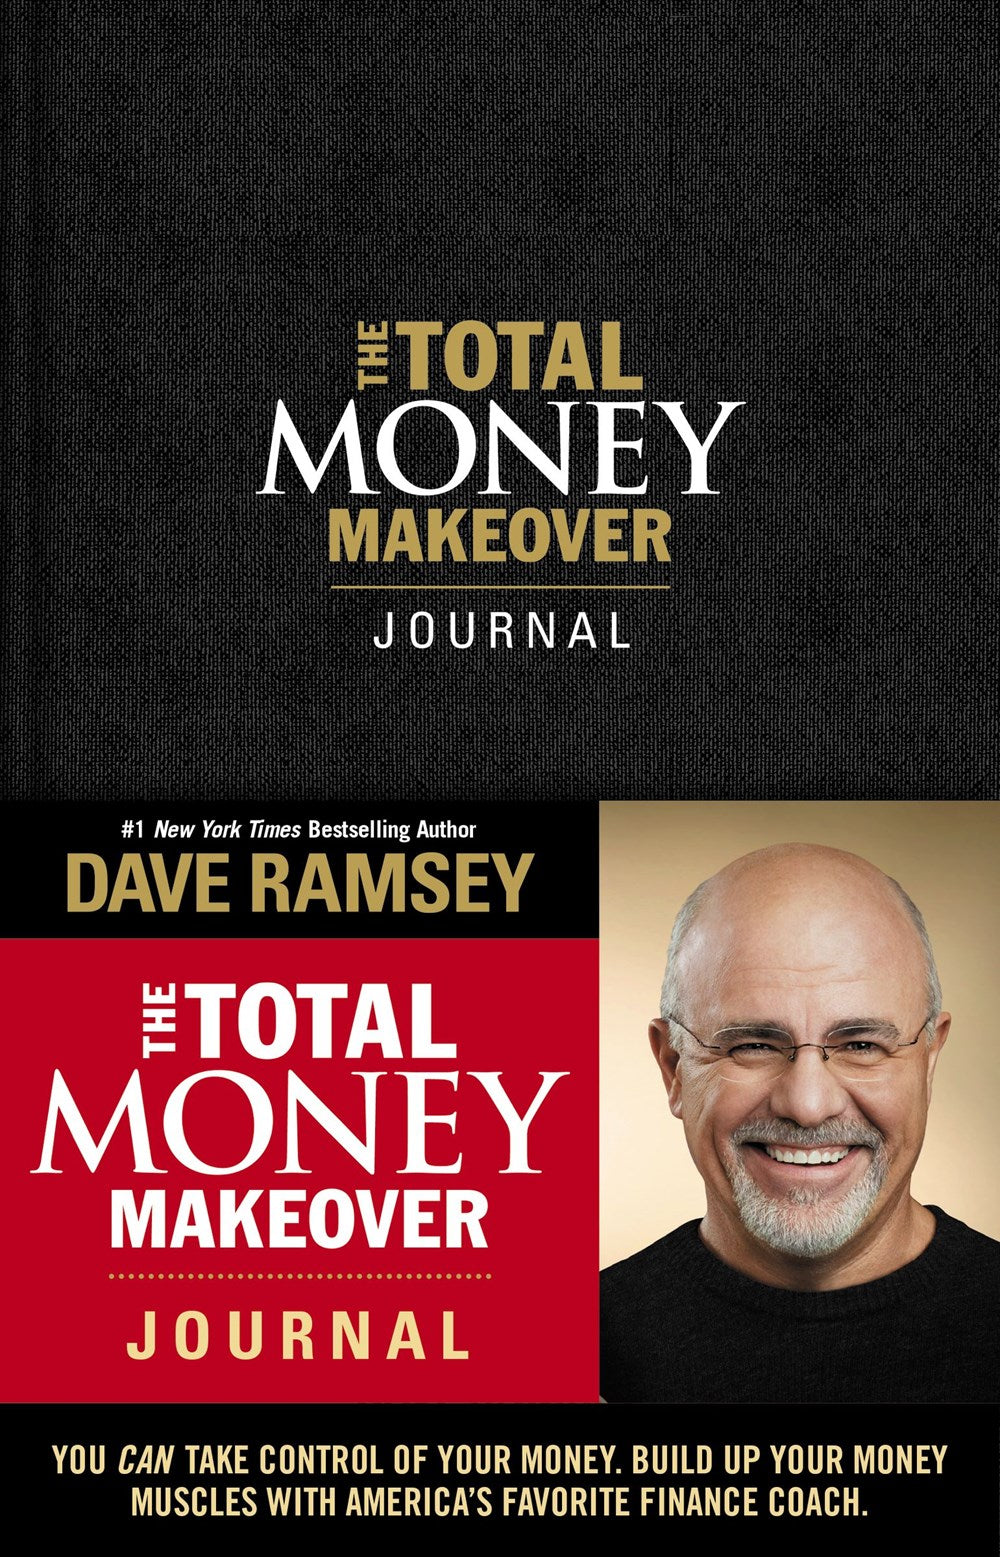 The Total Money Makeover Journal